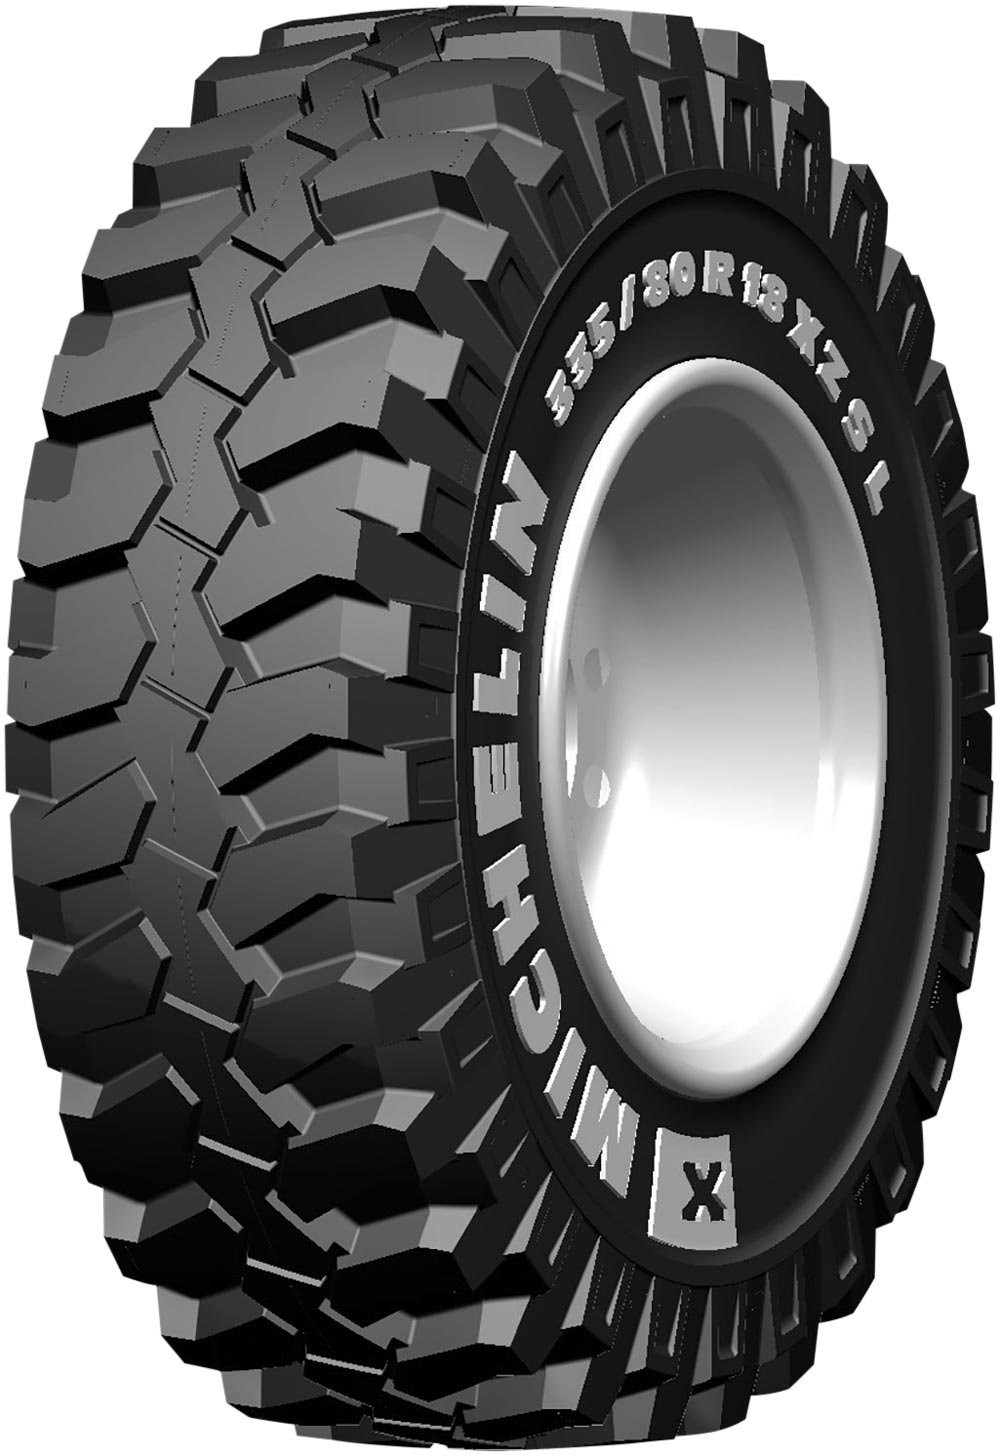 product_type-industrial_tires MICHELIN STABIL'X XZSL TL 12 R16.5 305R